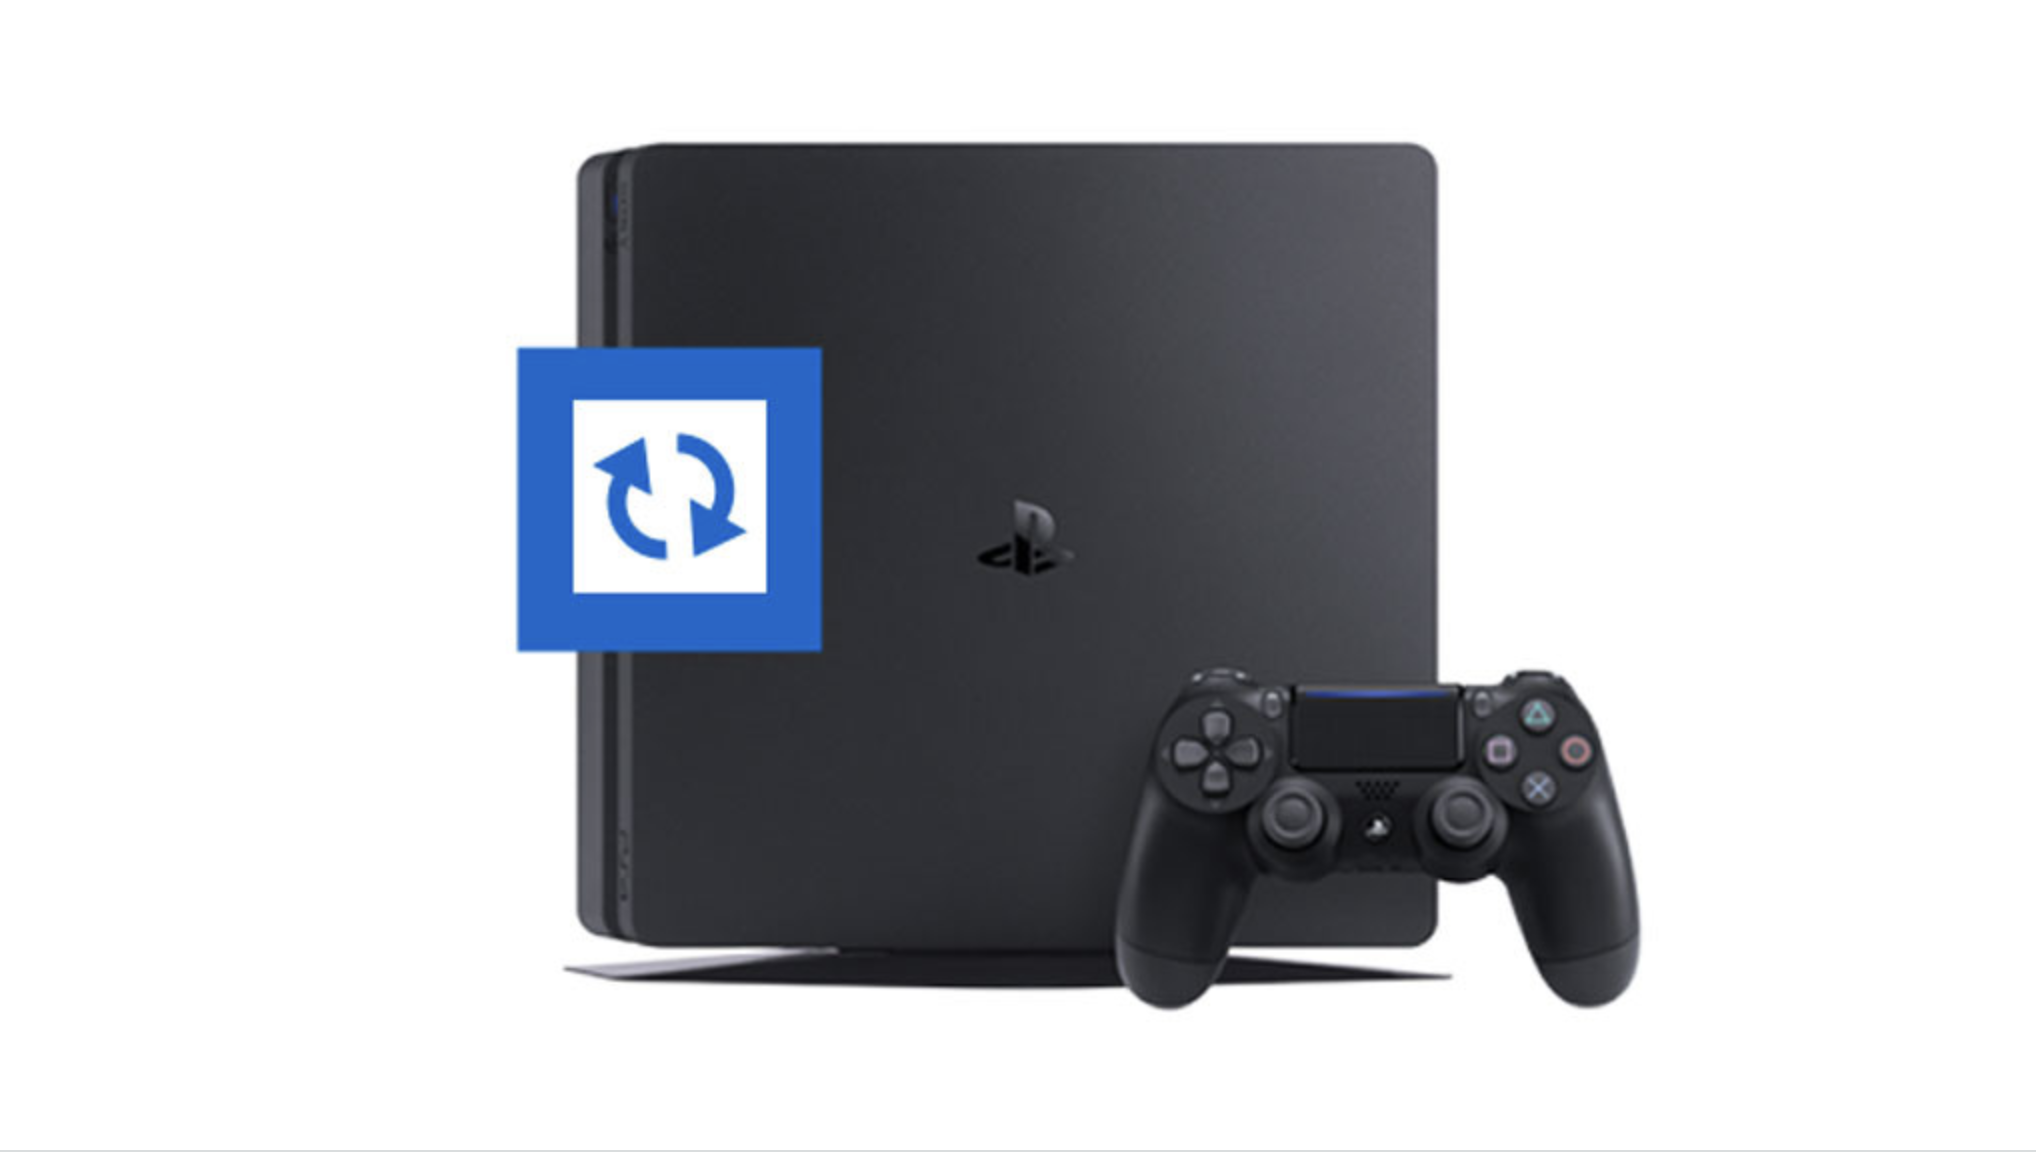 Плейстейшен 8. Ds50 ps4. Ps4 Pro Firmware. Ps4 Pro 9.00. Ps4 6.72